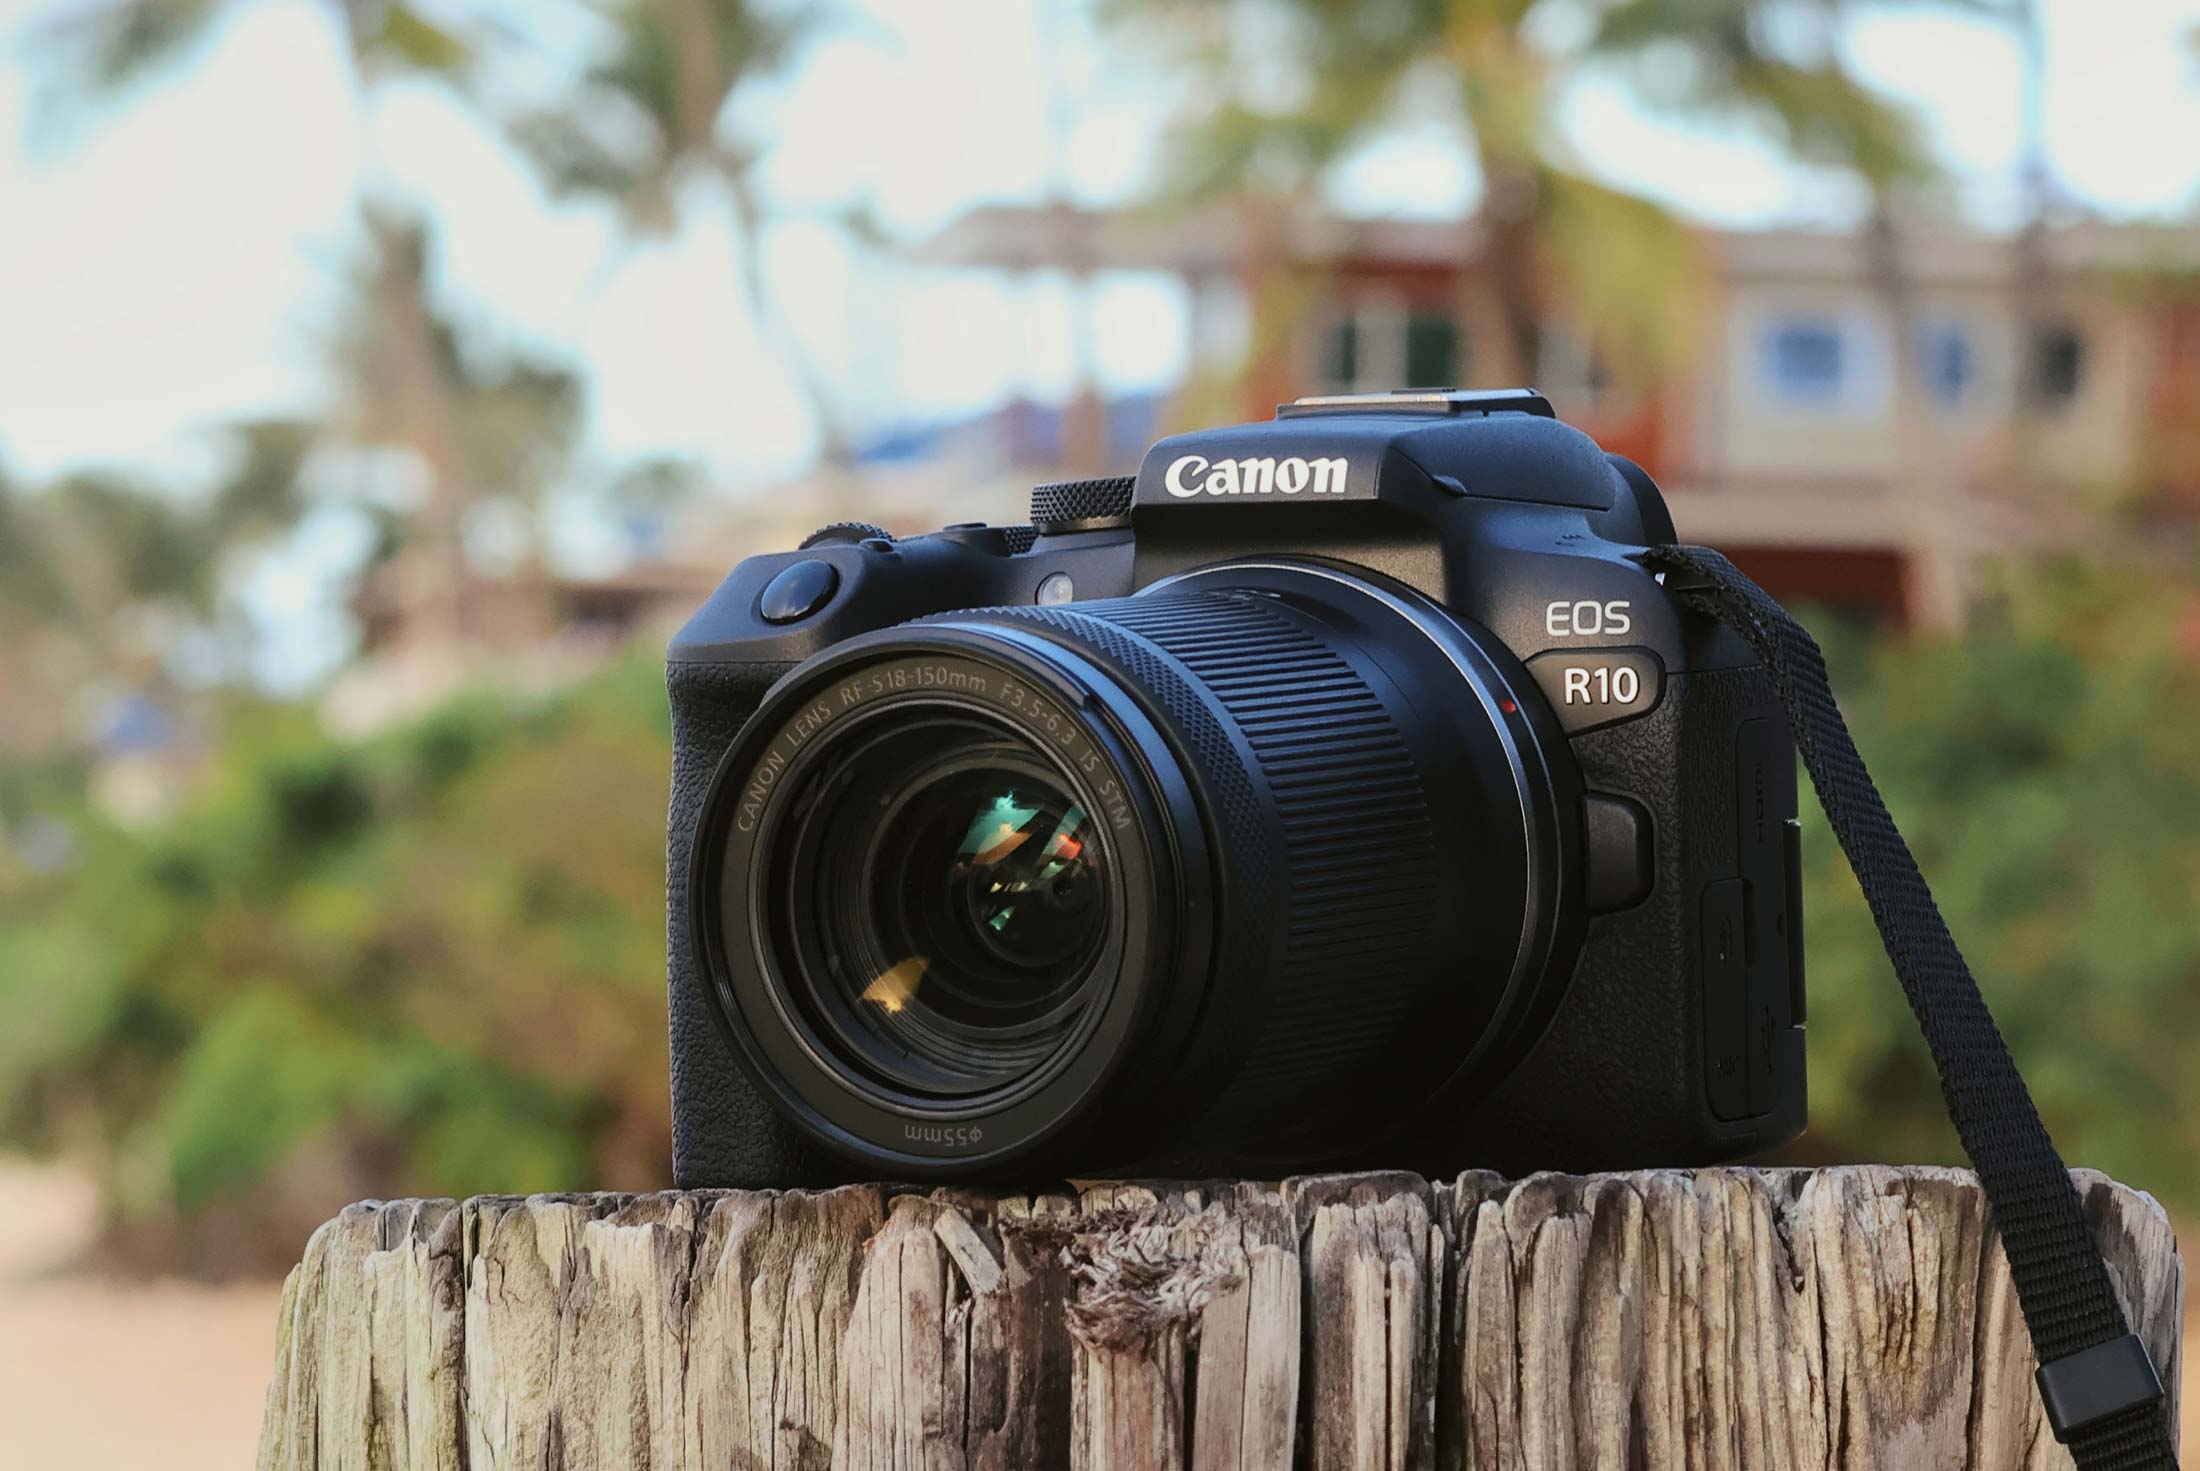 The Canon EOS R10 Is Here - The Orms Photographic Blog